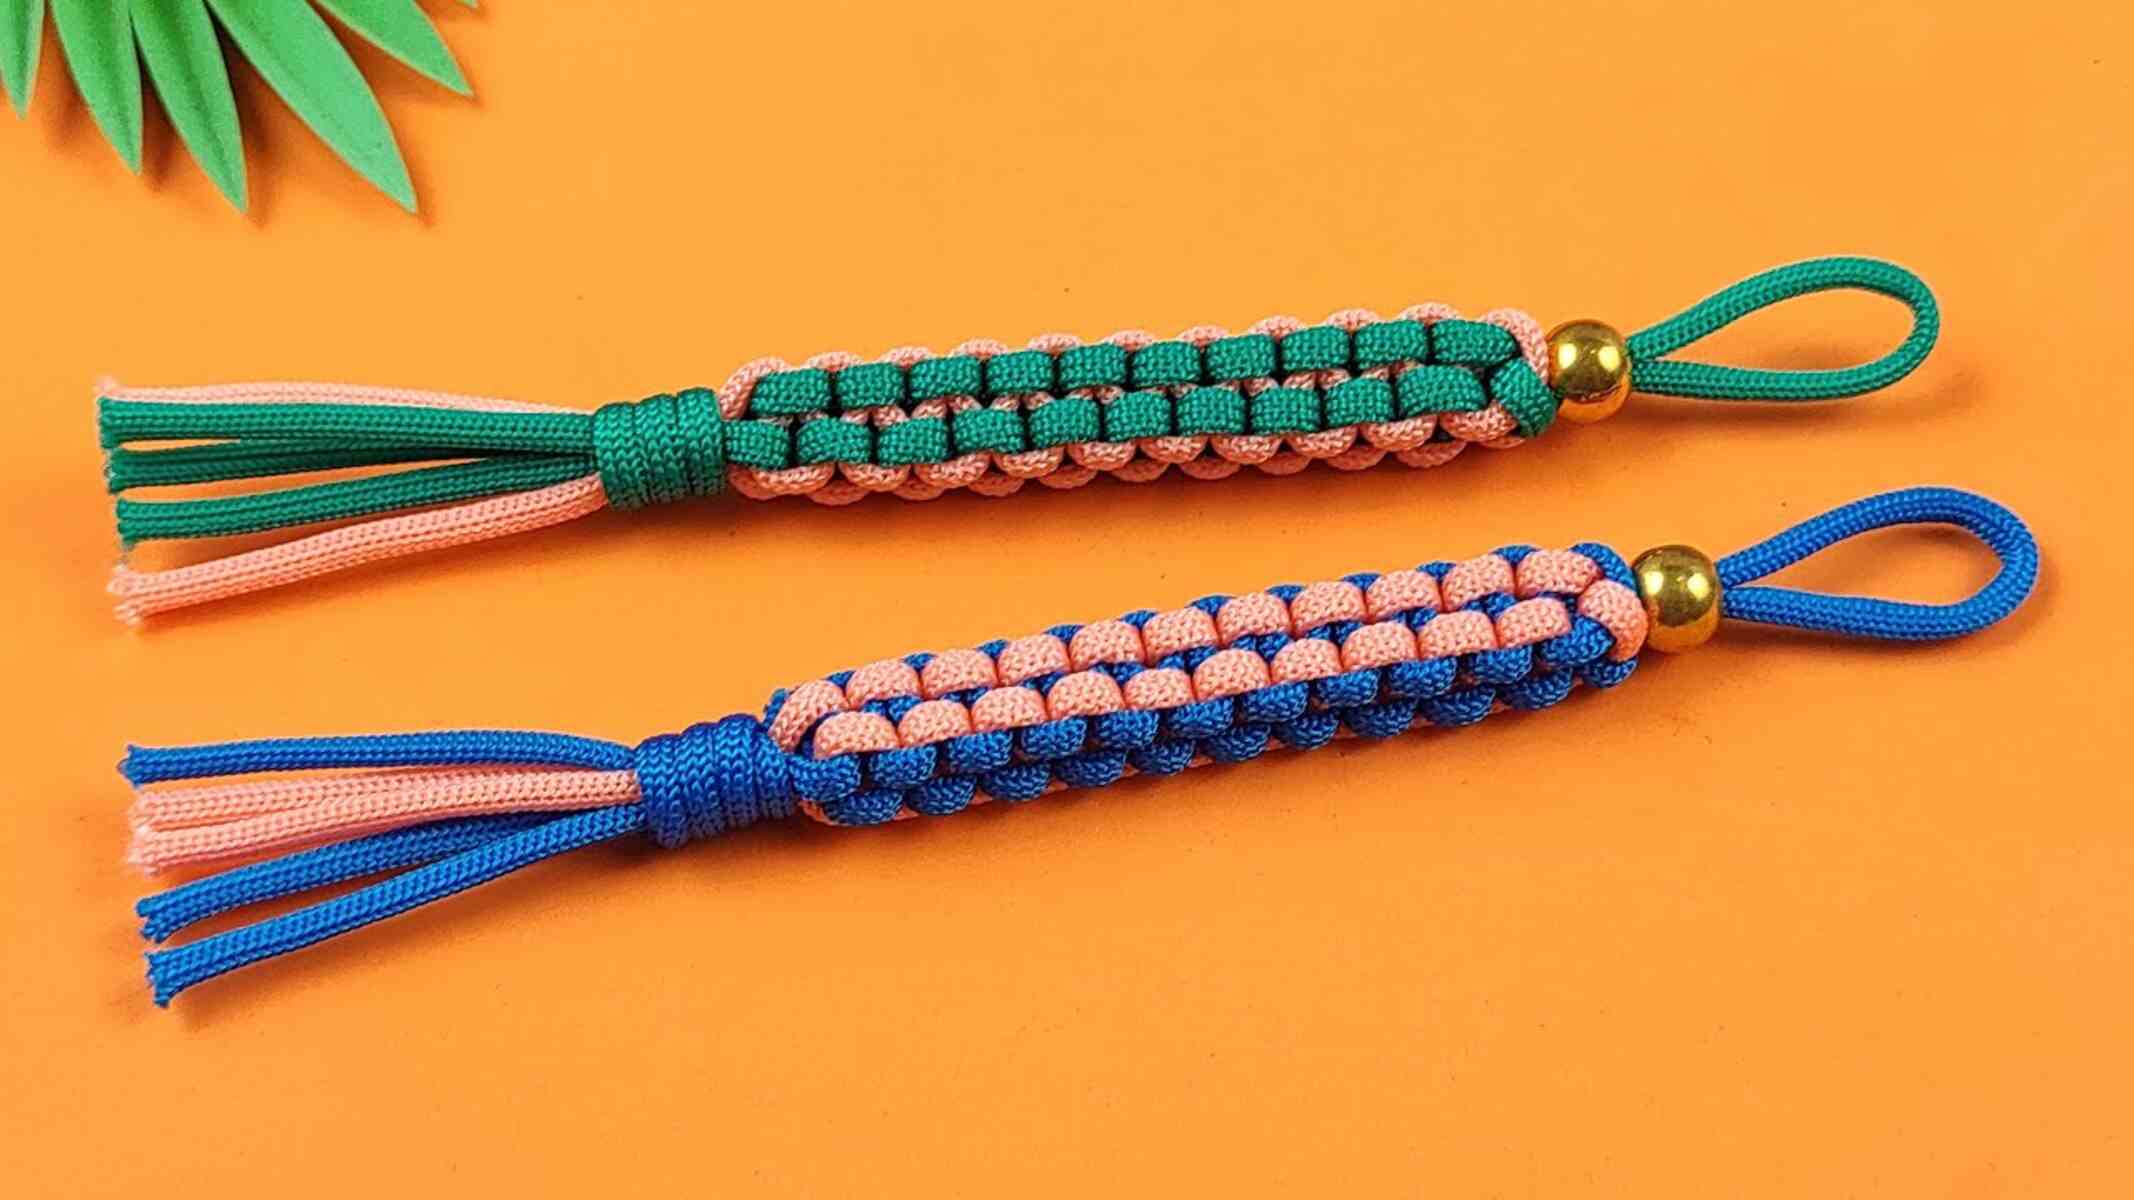 Triplet Crafting: Making Lanyards With Three Strings